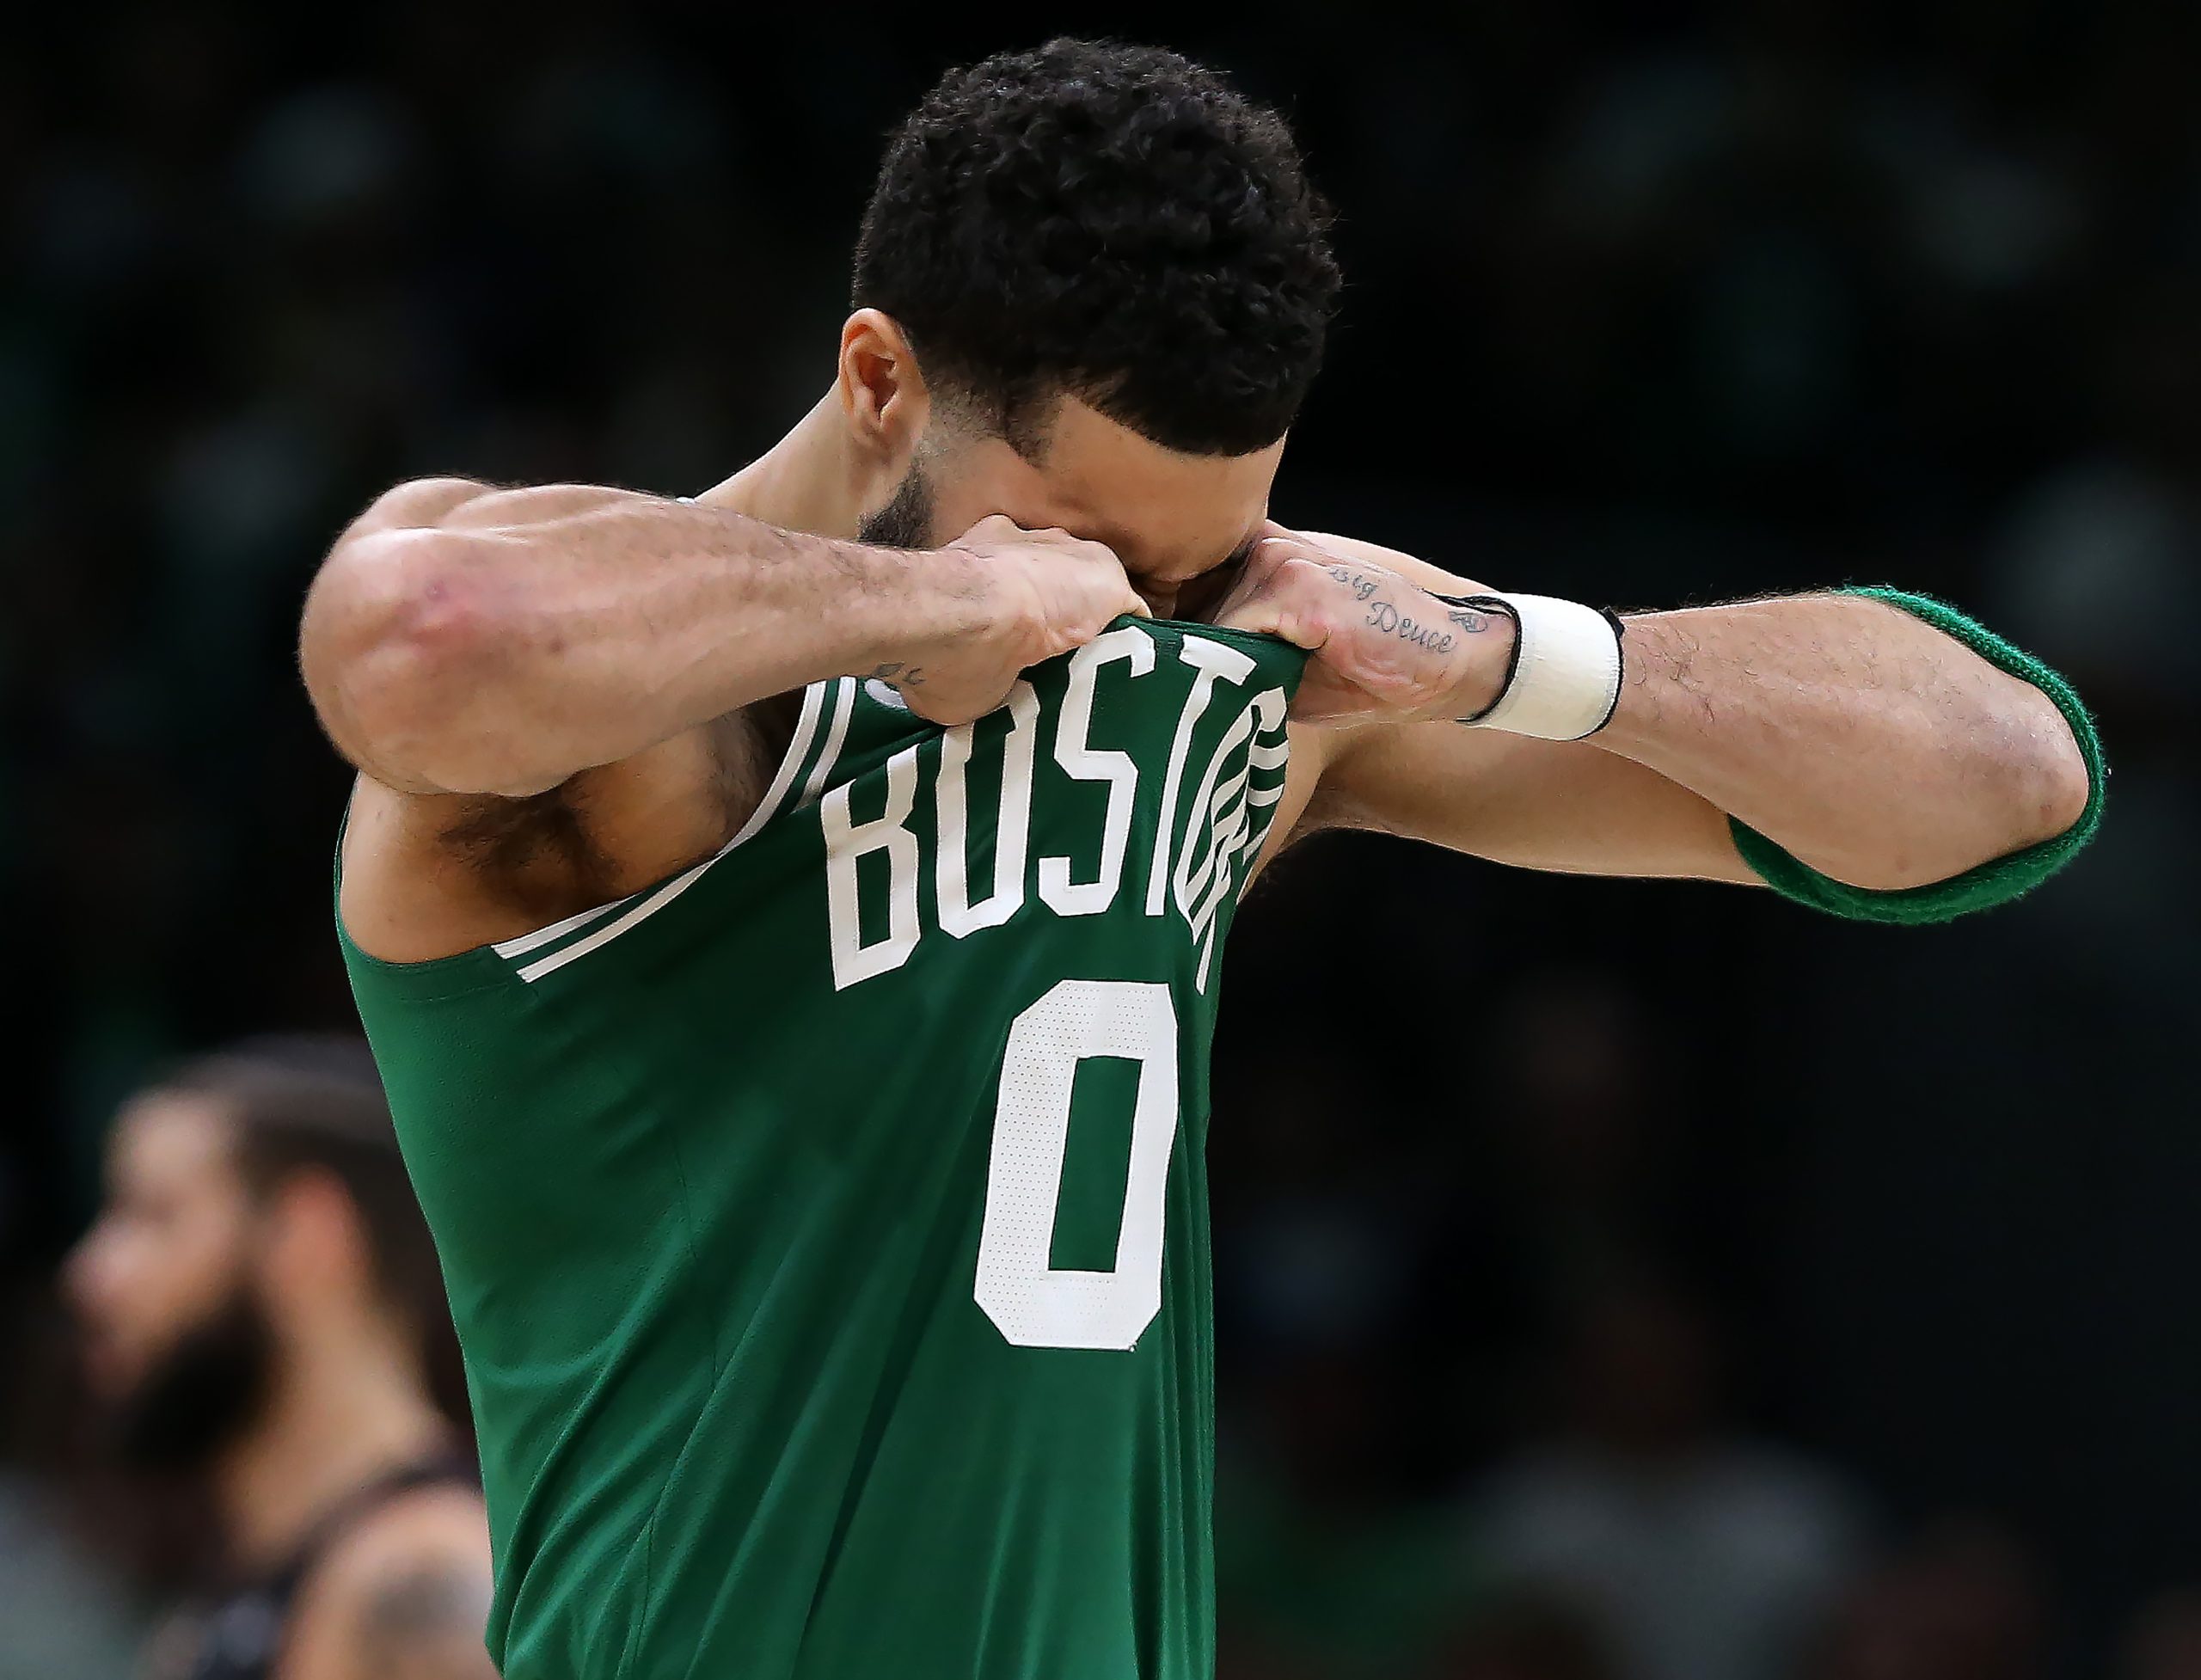 Breaking: Jayson Tatum very upset with Jaylen Brown’s ‘disrespful’ comments towards him, following…